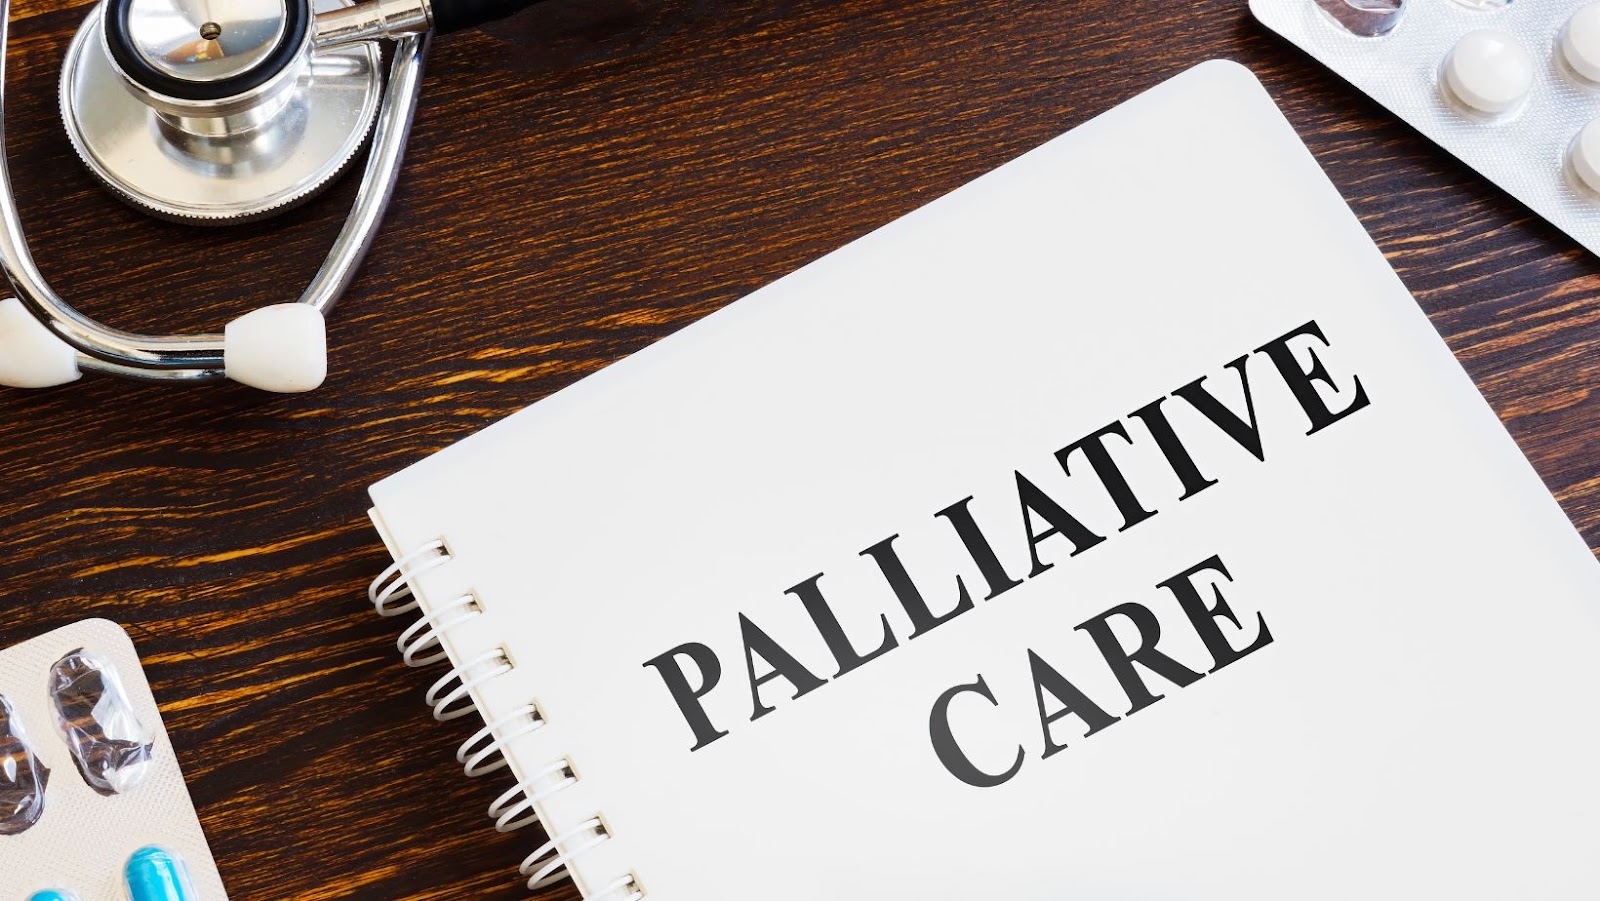 5 stages of palliative care